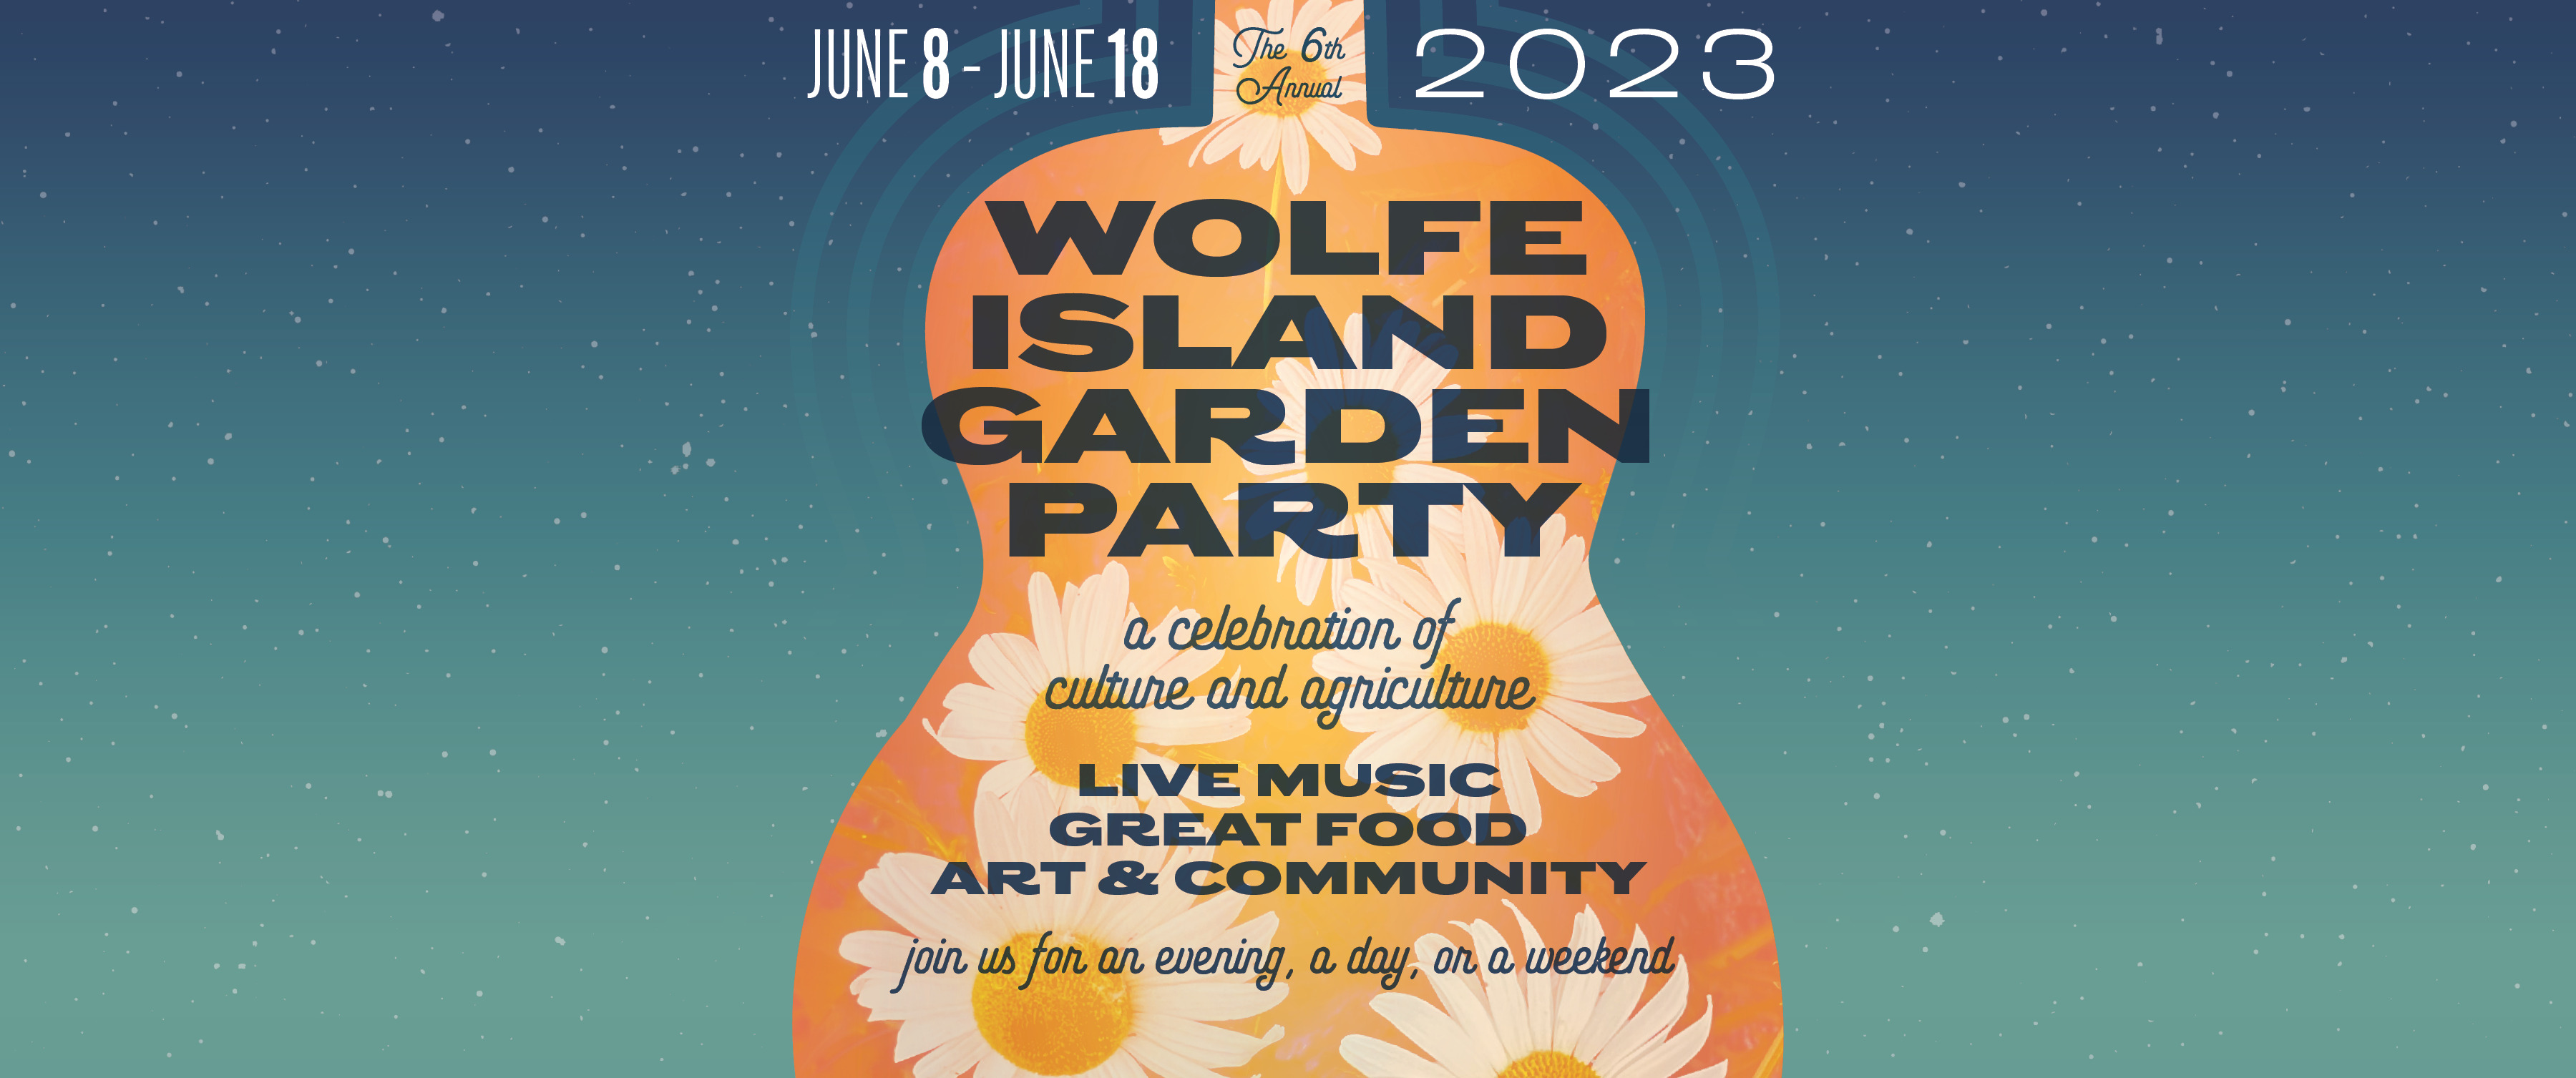 The 6th Annual Wolfe Island Garden Party: A celebration of culture and agriculture. June 8 - June 18, 2023. Live music, great food, art & community. Join us for an evening, a day, or a weekend